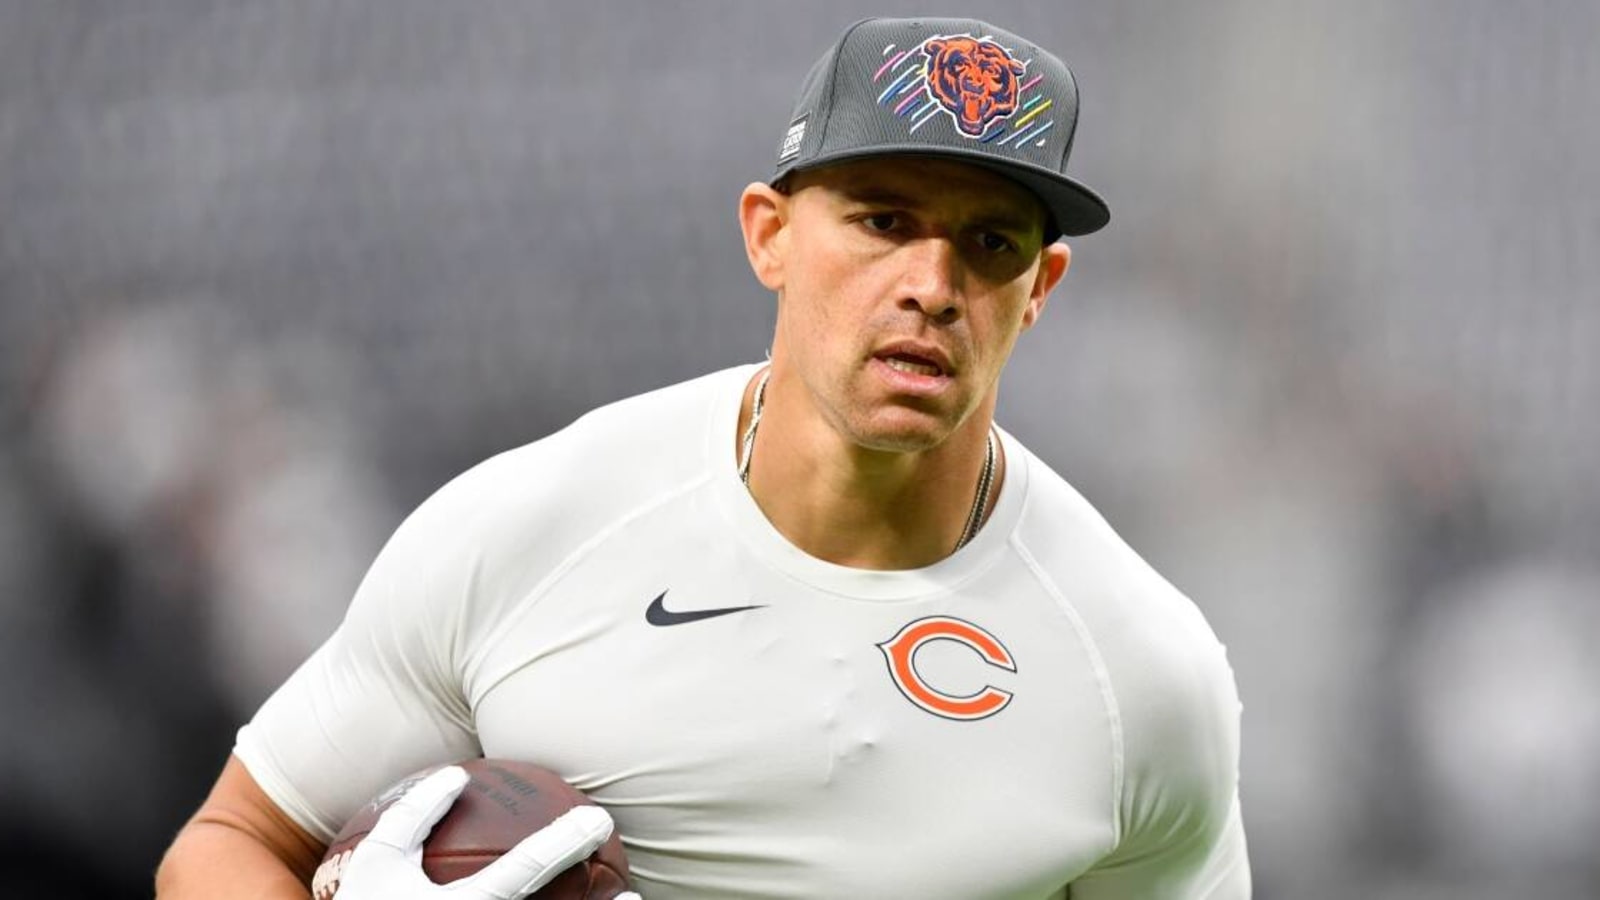 Former NFL TE Jimmy Graham reportedly hit by car while training to sail around the world